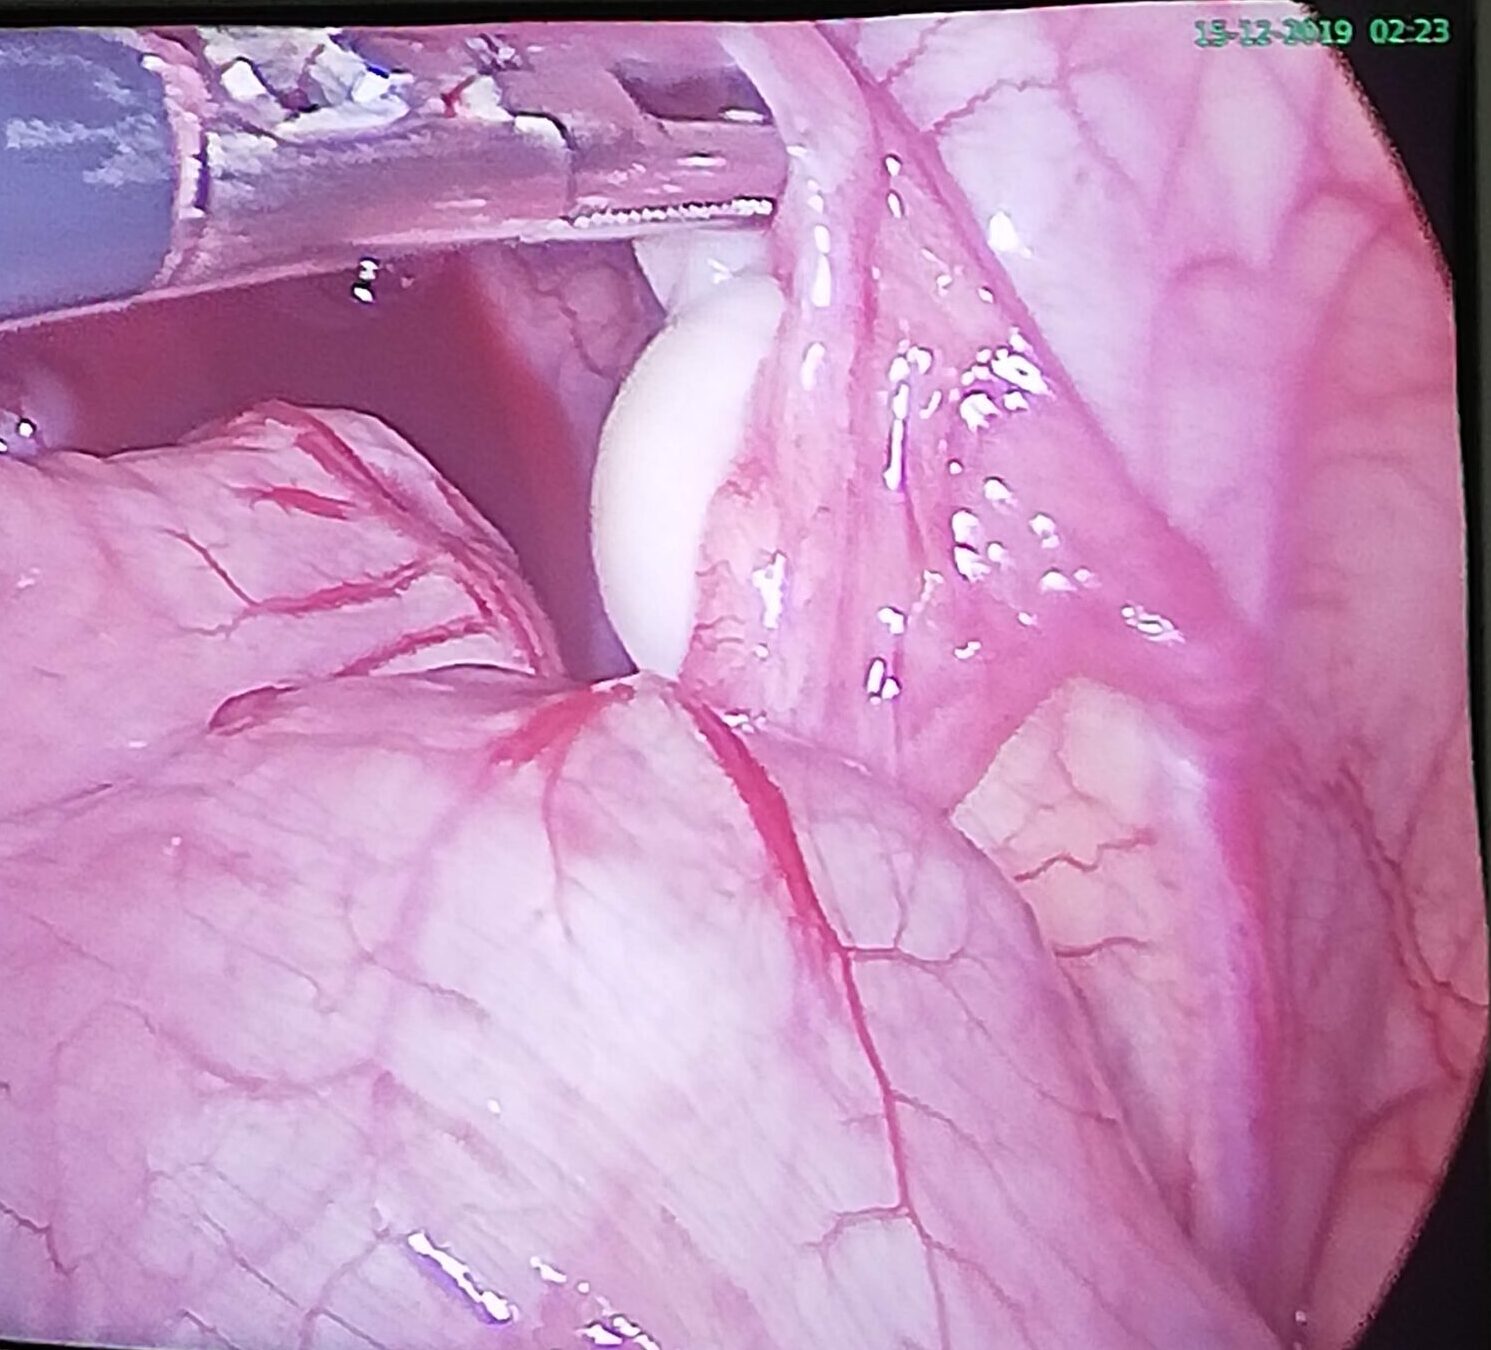 Lapraoscopic View of Child with undescended testis